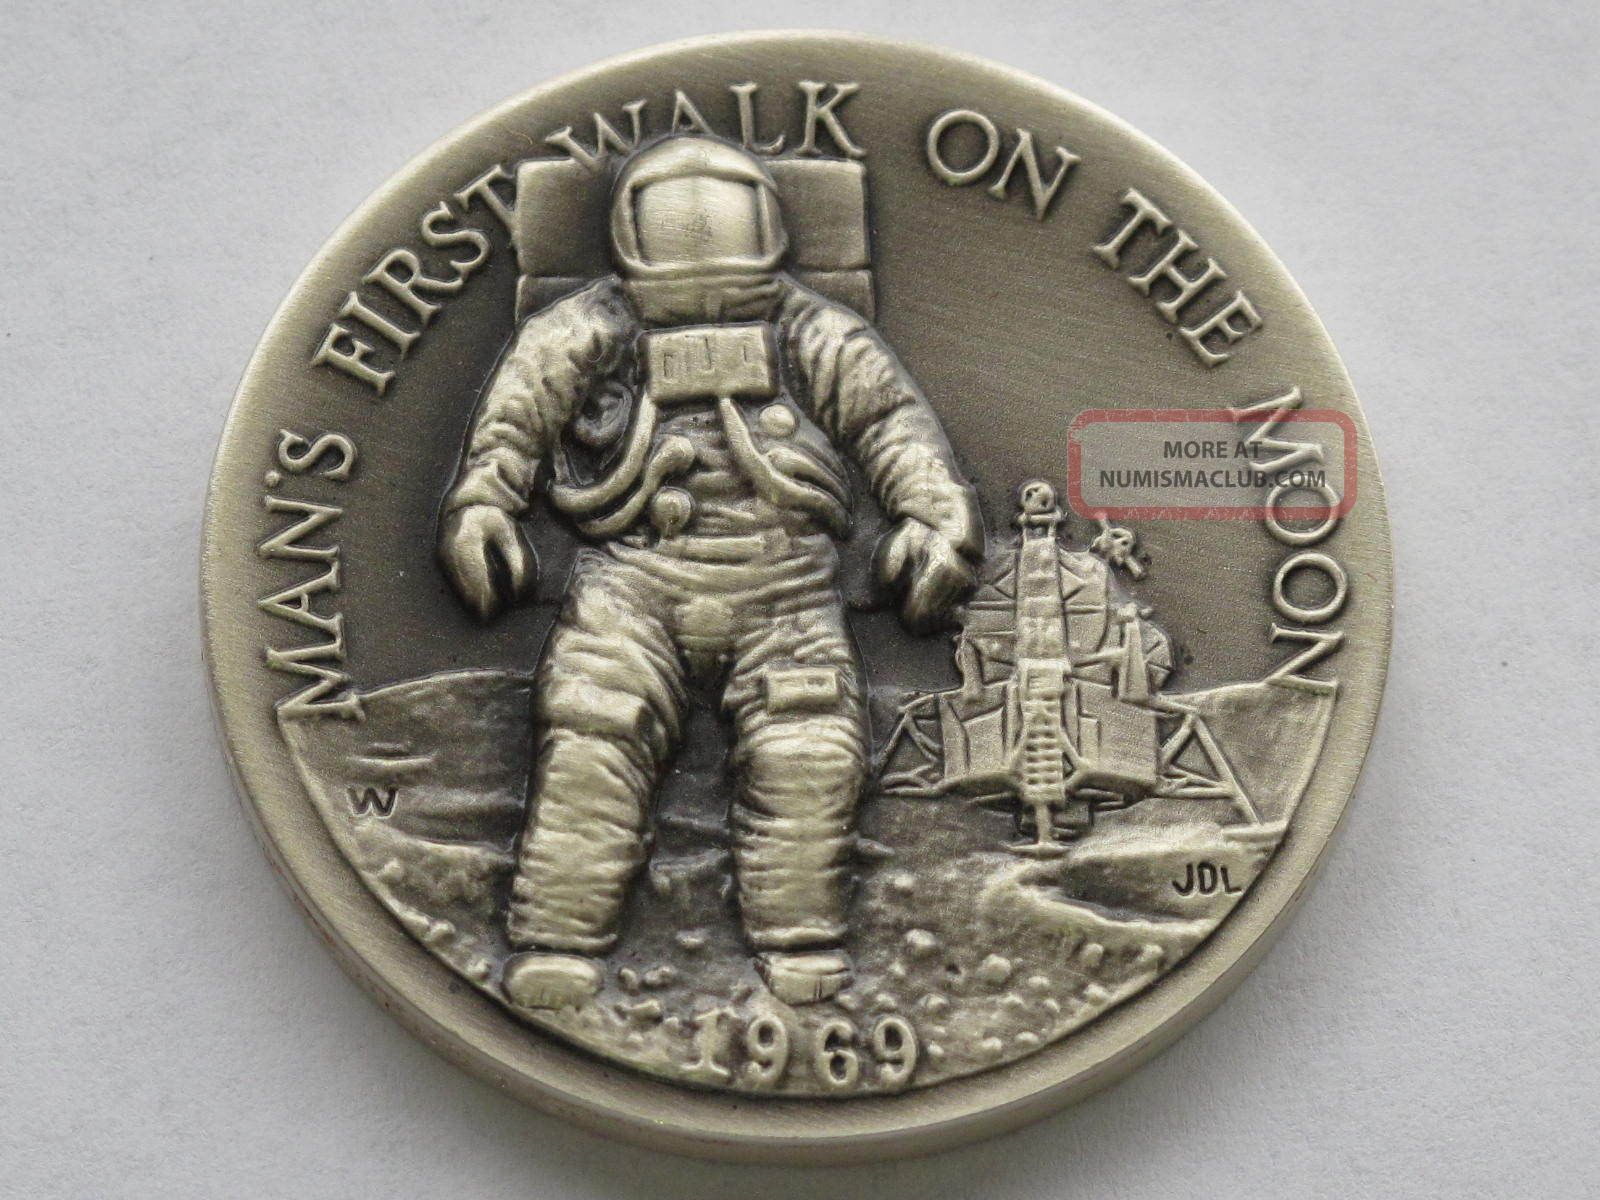 Man ' S First Walk On Moon Sterling Silver Medal Great American ...